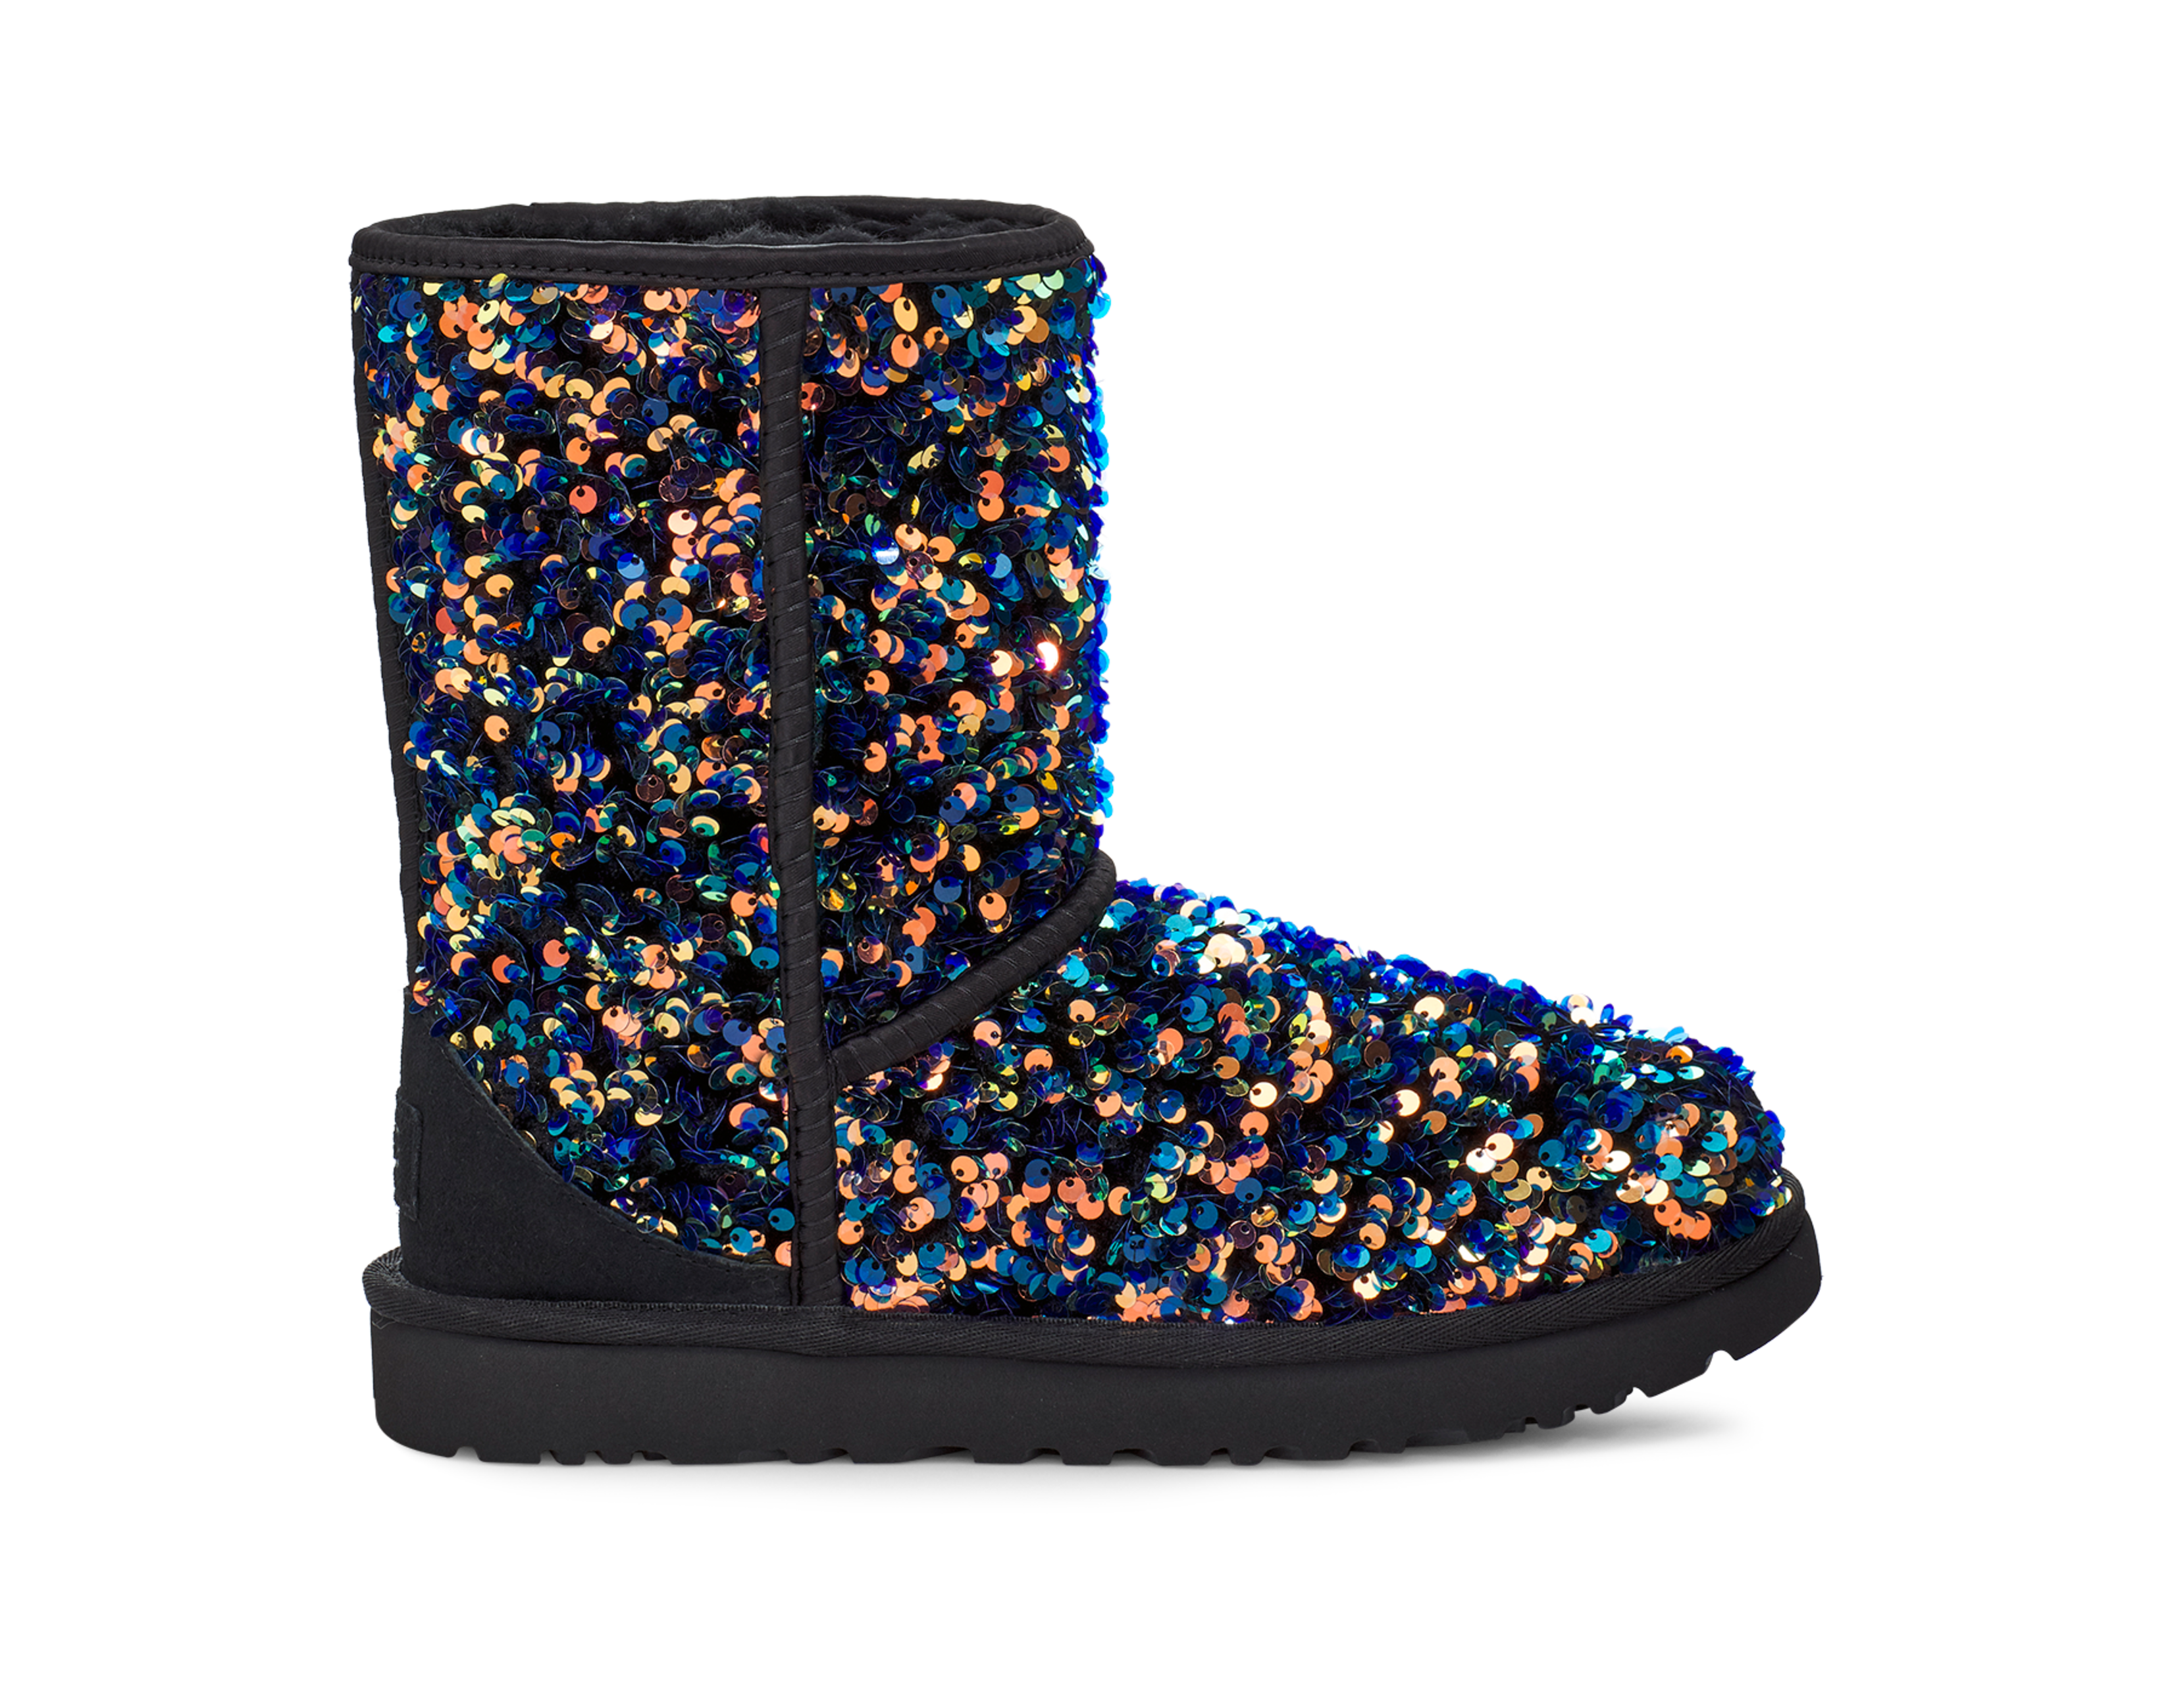 Classic Double Bow Mini  Sequin boots, Suede leather boots